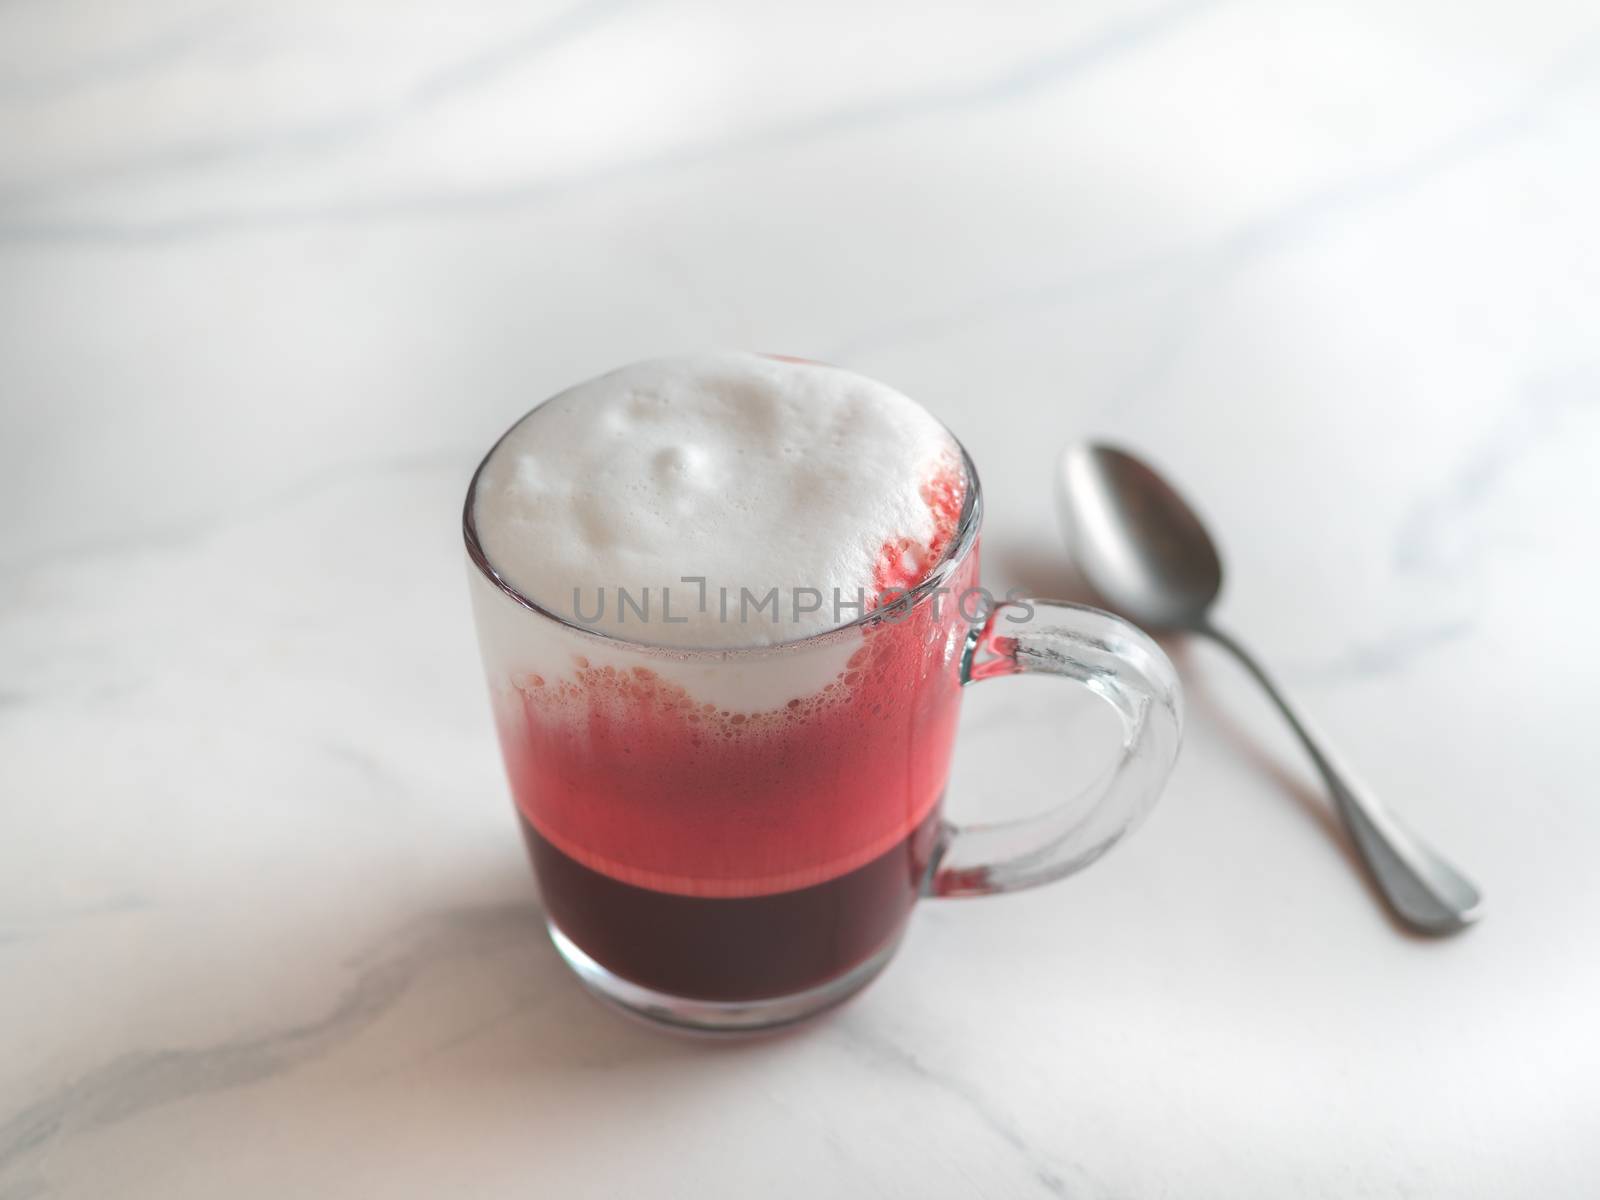 Trendy drink: pink red velvet latte. Beetroot cappuccino or latte in glass cup on white marble background. Copy space for text.